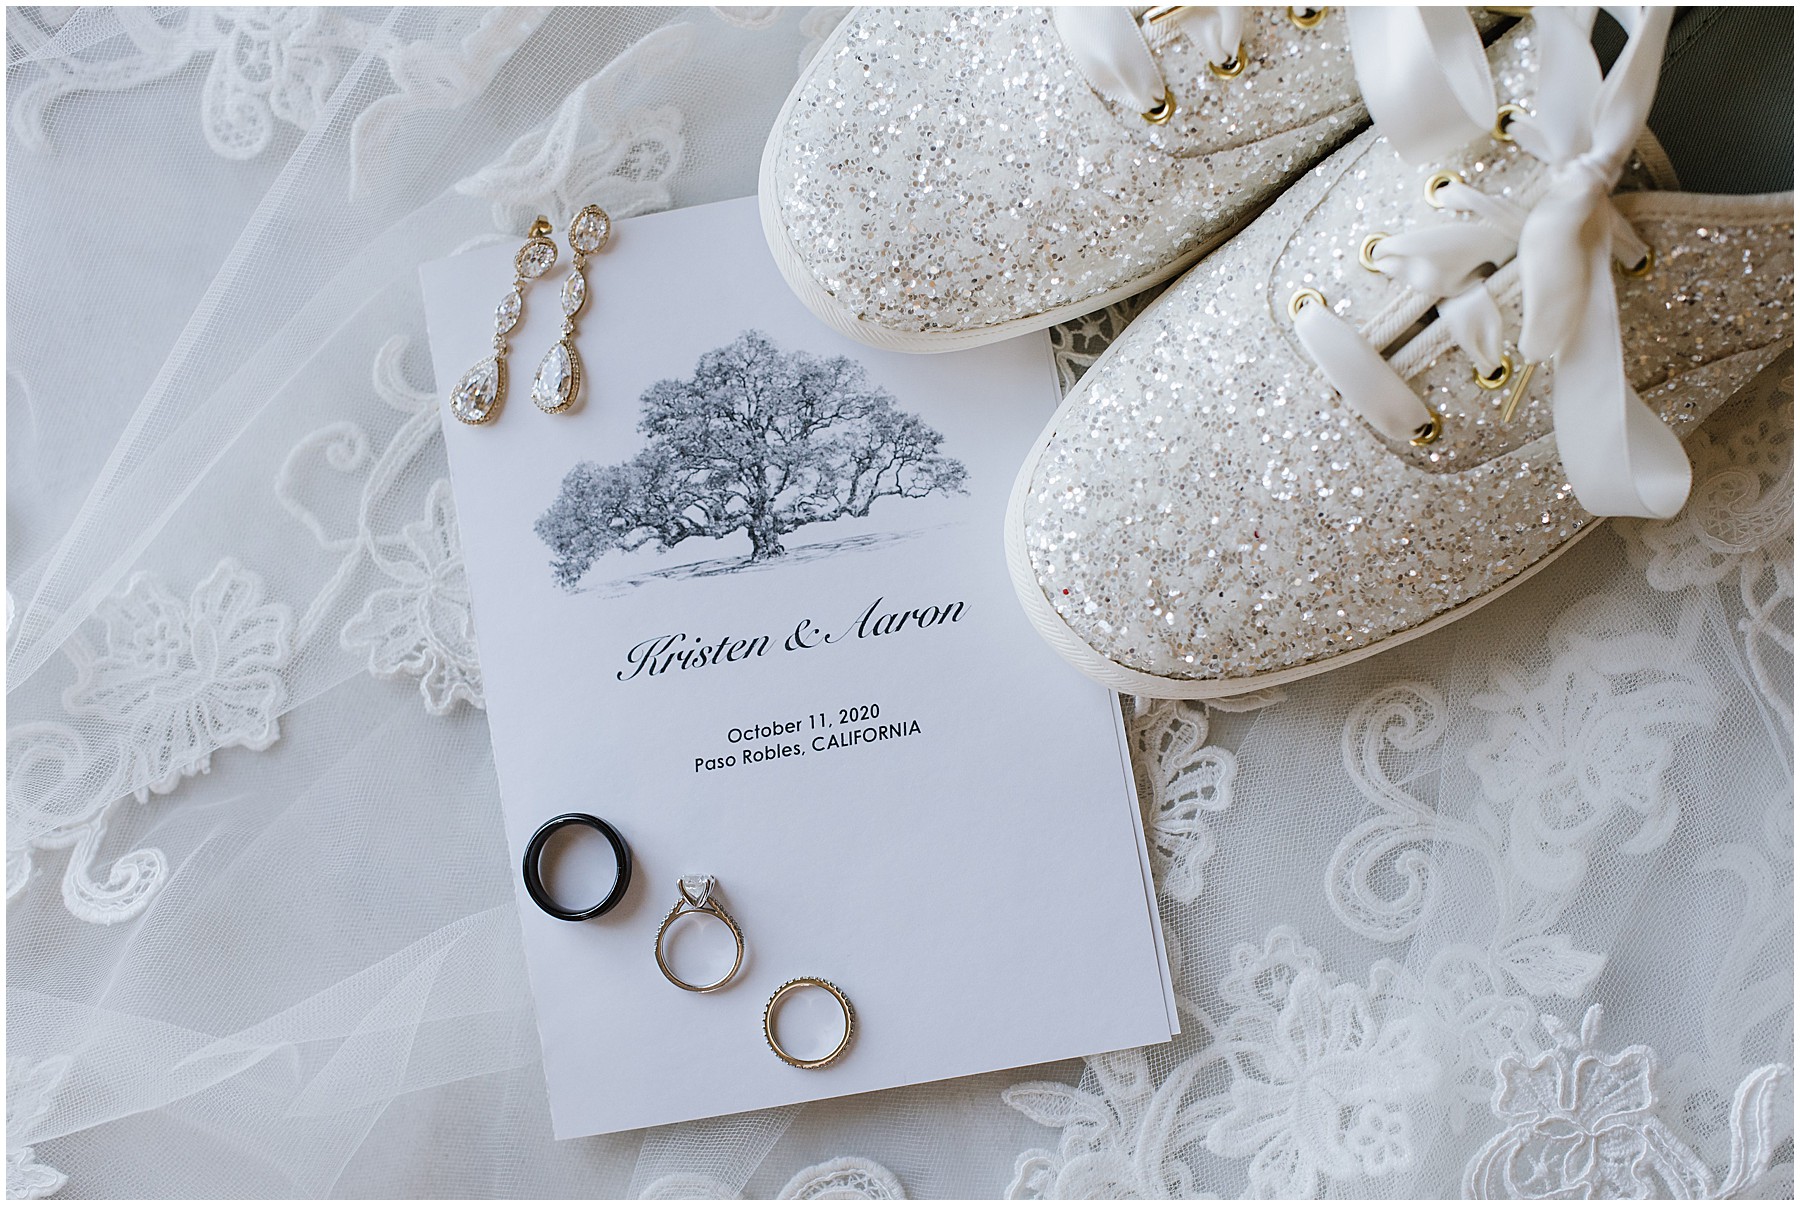 White wedding details. There are white sparkley shoes. They are sitting on a white wedding announcement beneath wedding rings.